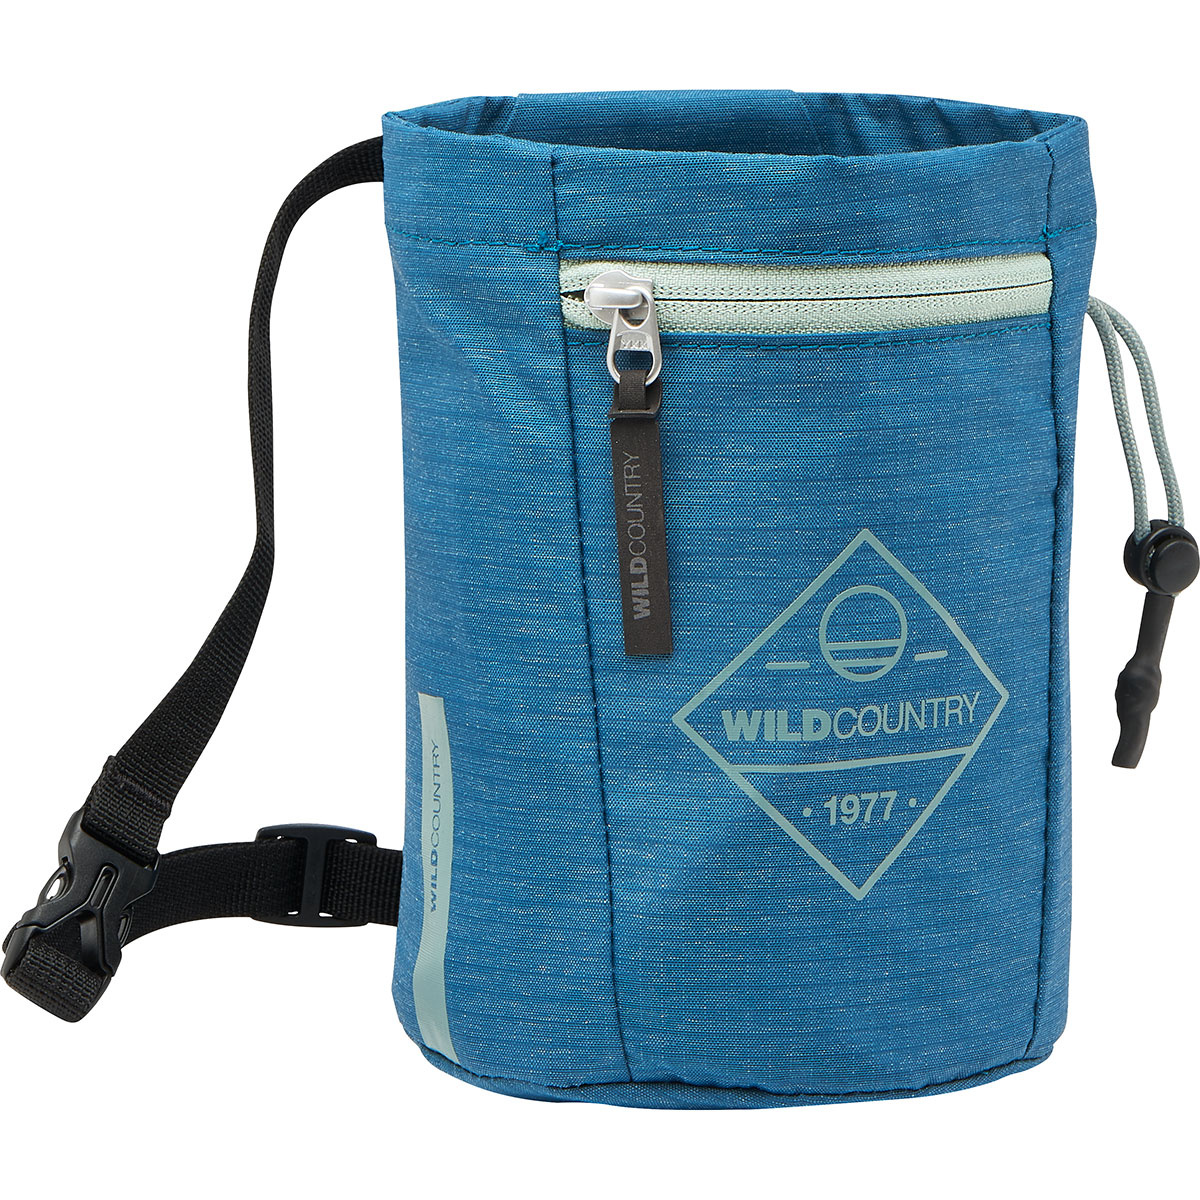 Image of Wild Country Syncro Chalkbag